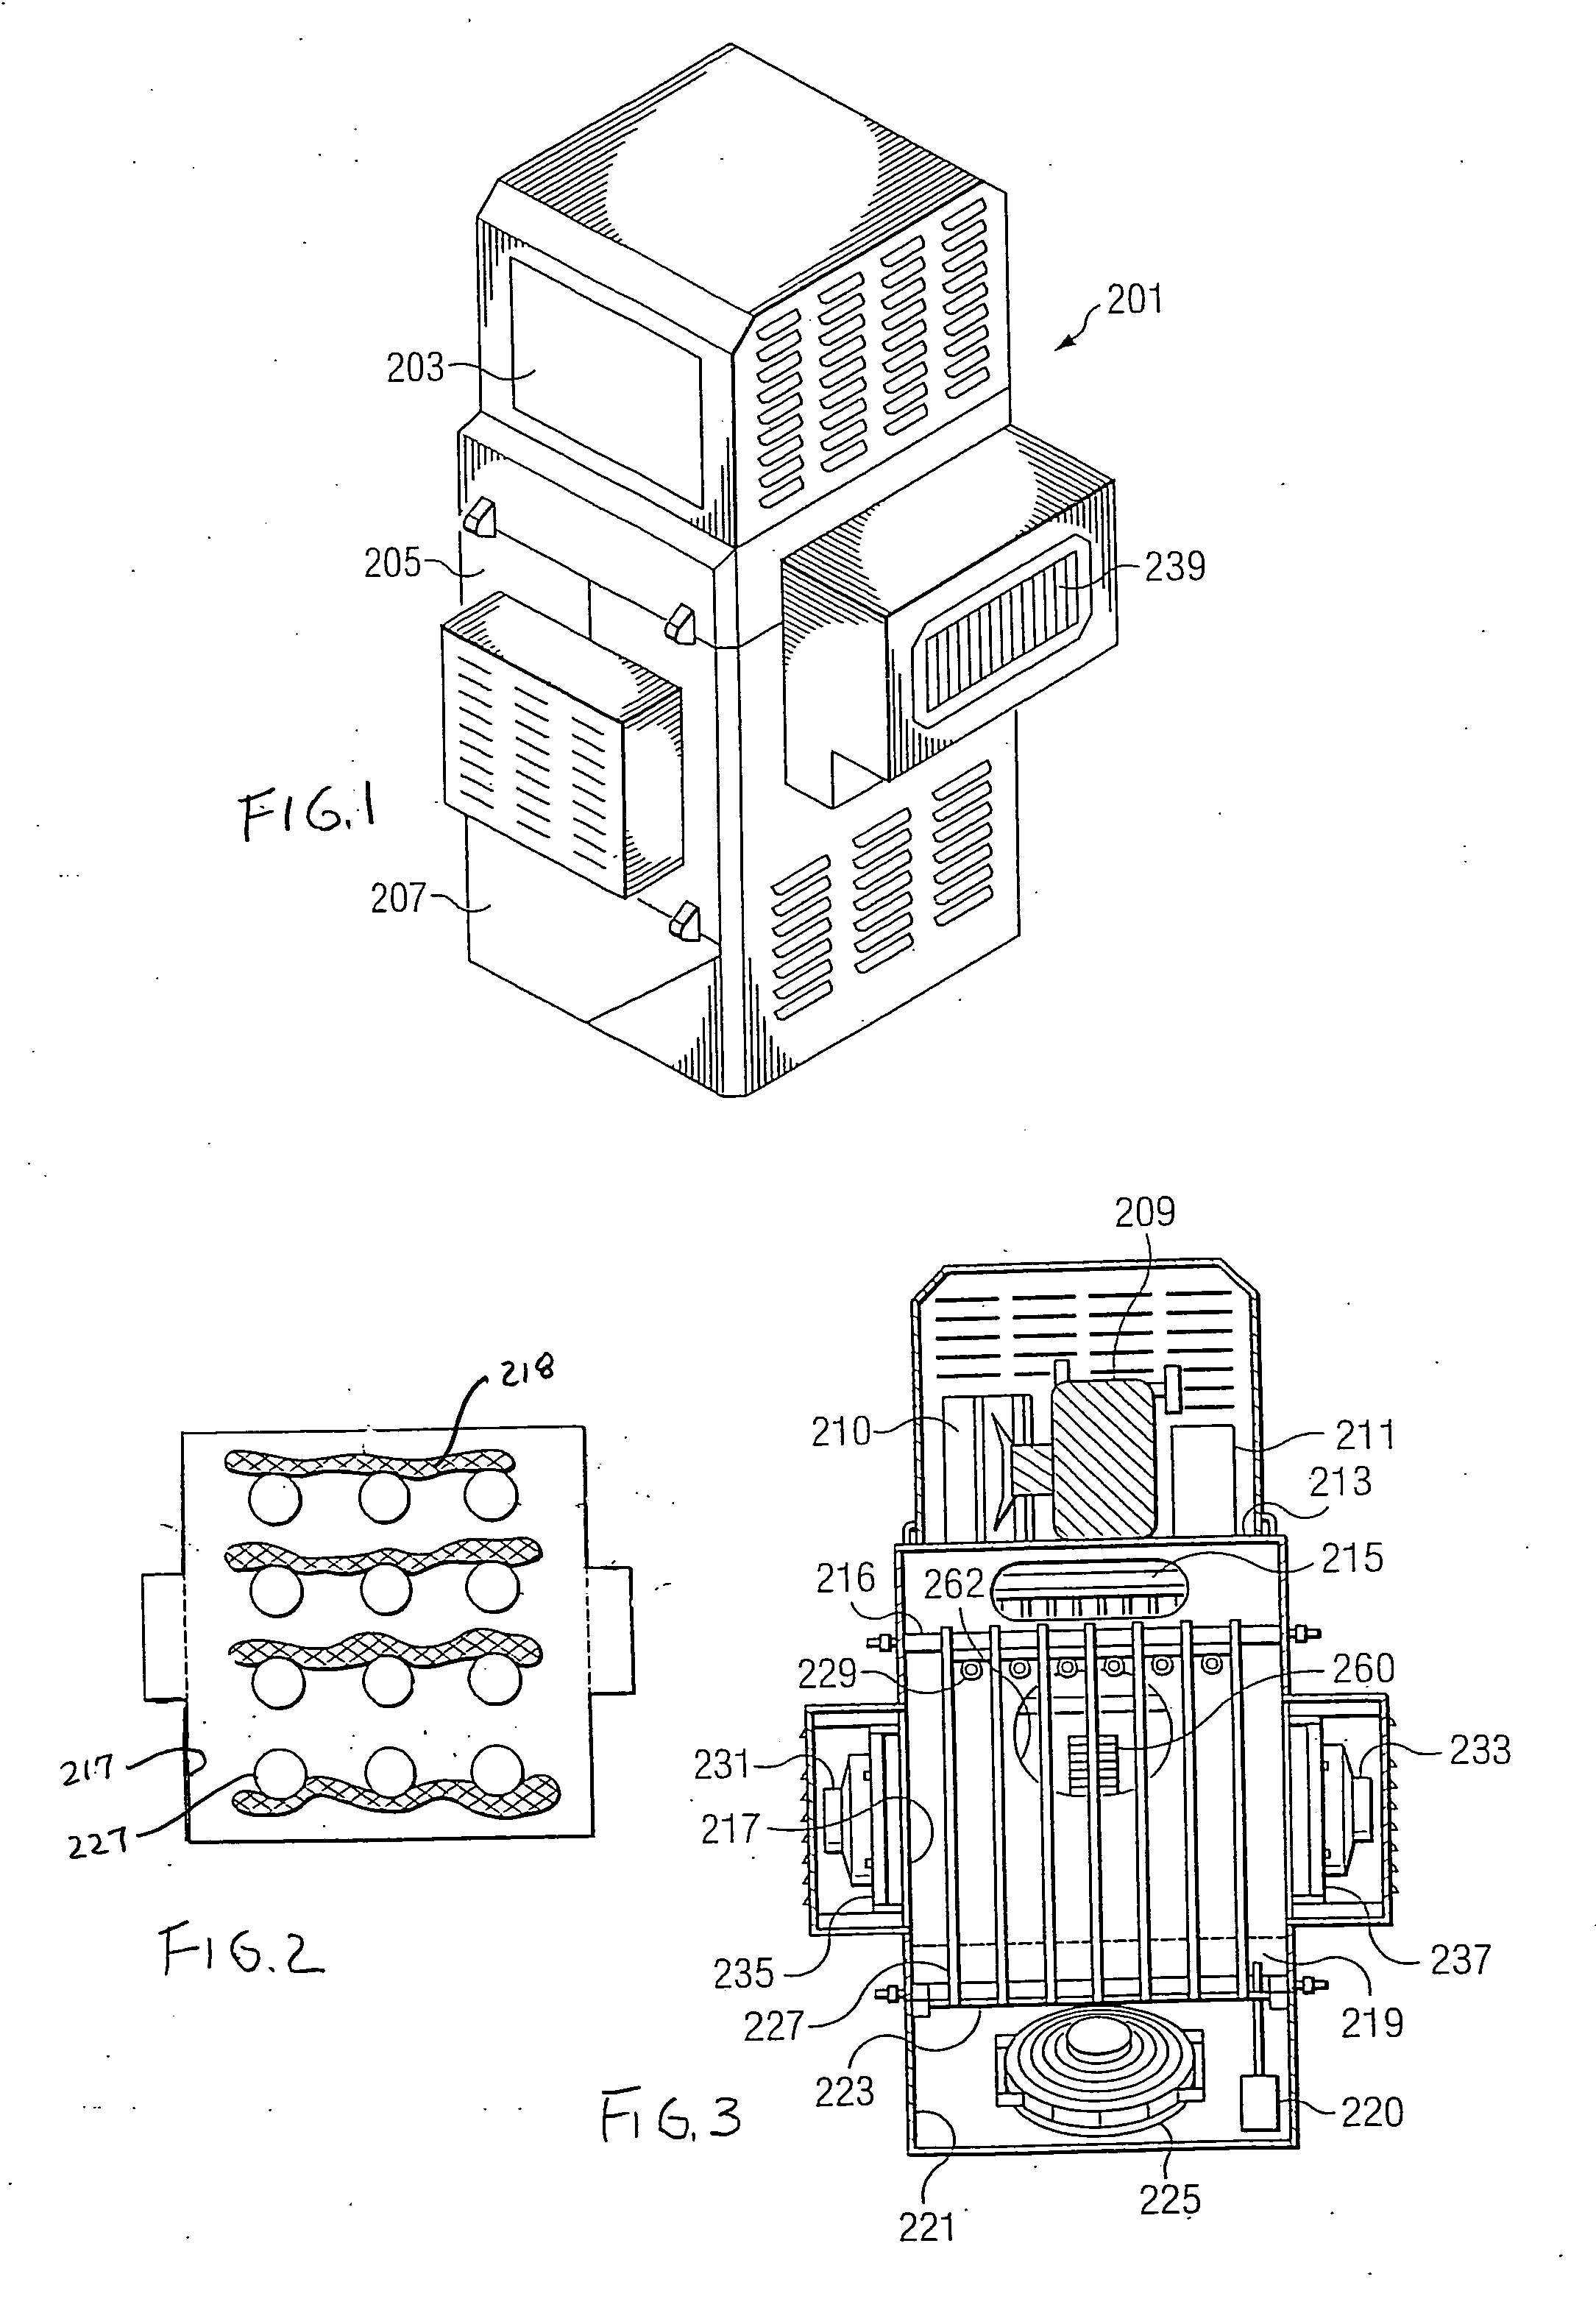 Method and apparatus for generating drinking water by condensing air humidity